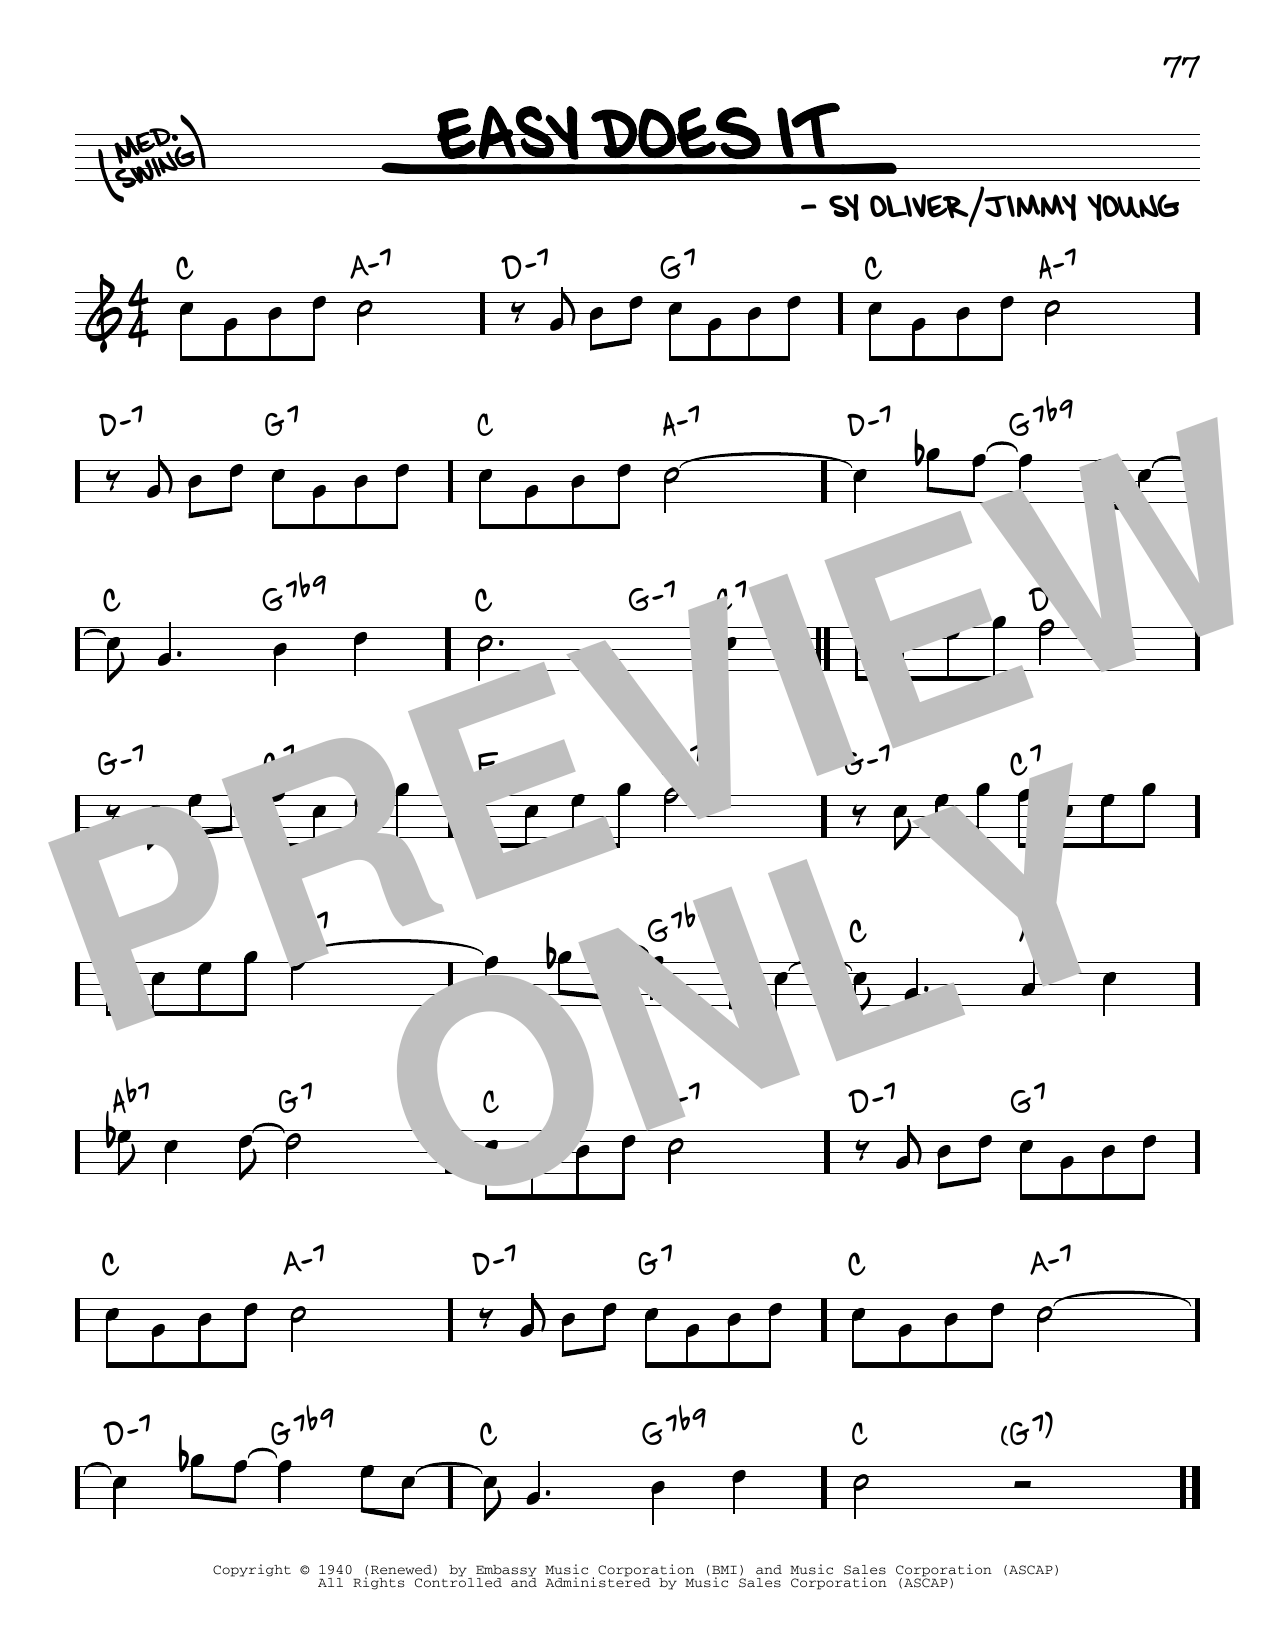 Download Jimmy Young Easy Does It Sheet Music